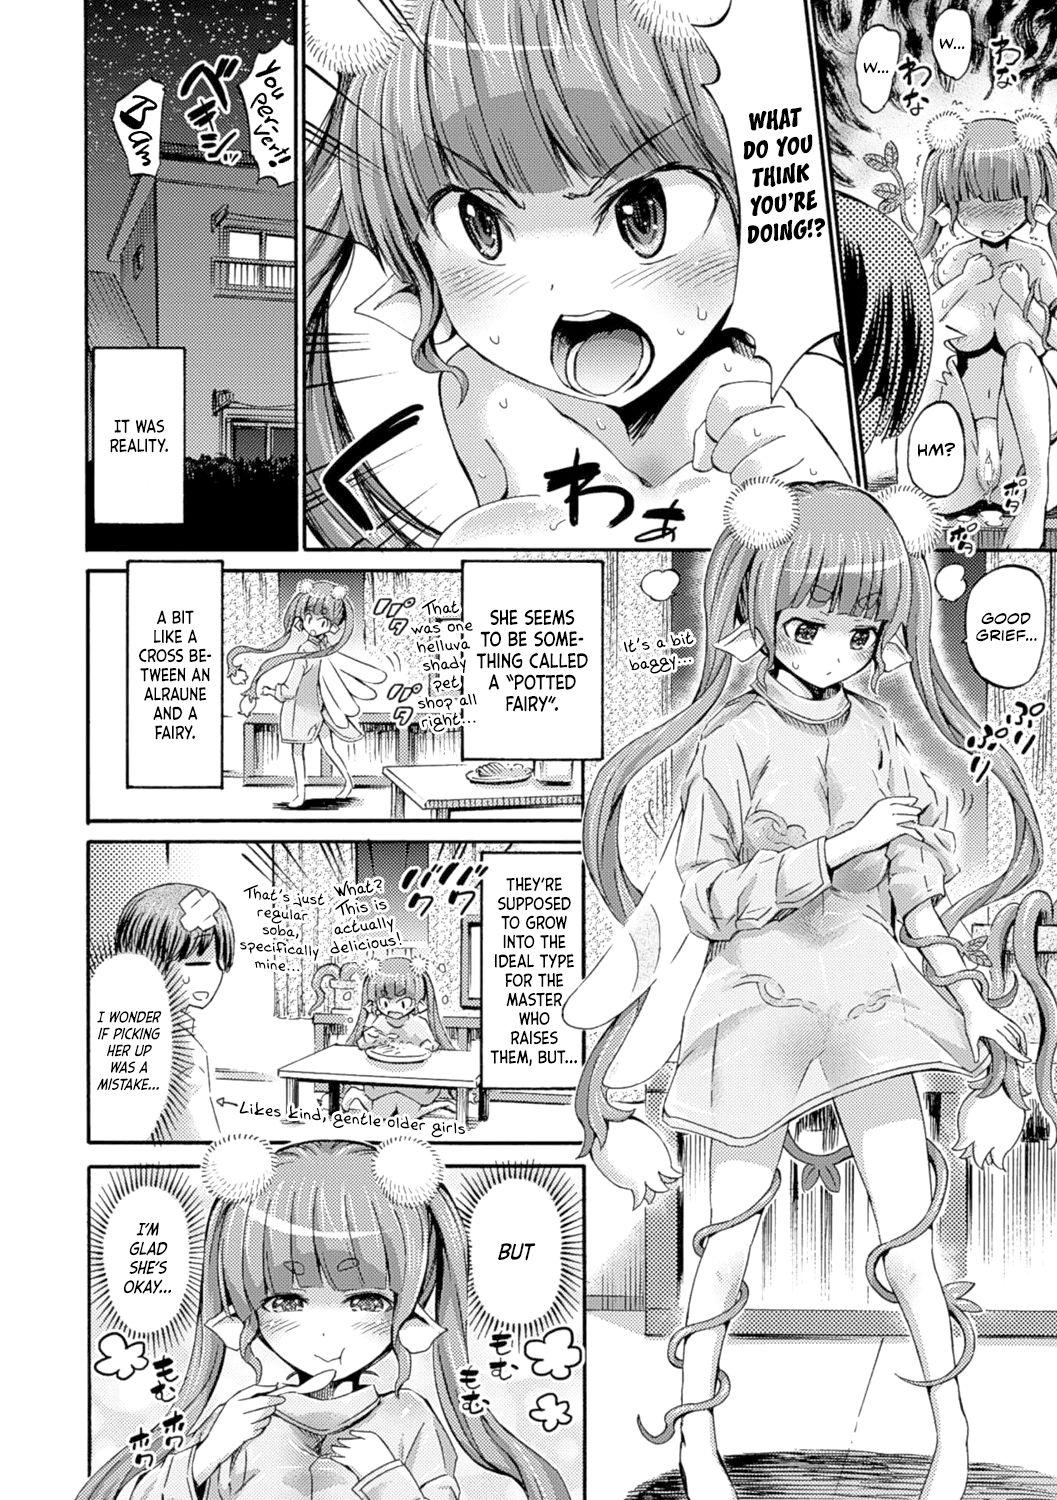 Oldvsyoung Hachi no Ue no Flower | Potted Flower Family Sex - Page 4